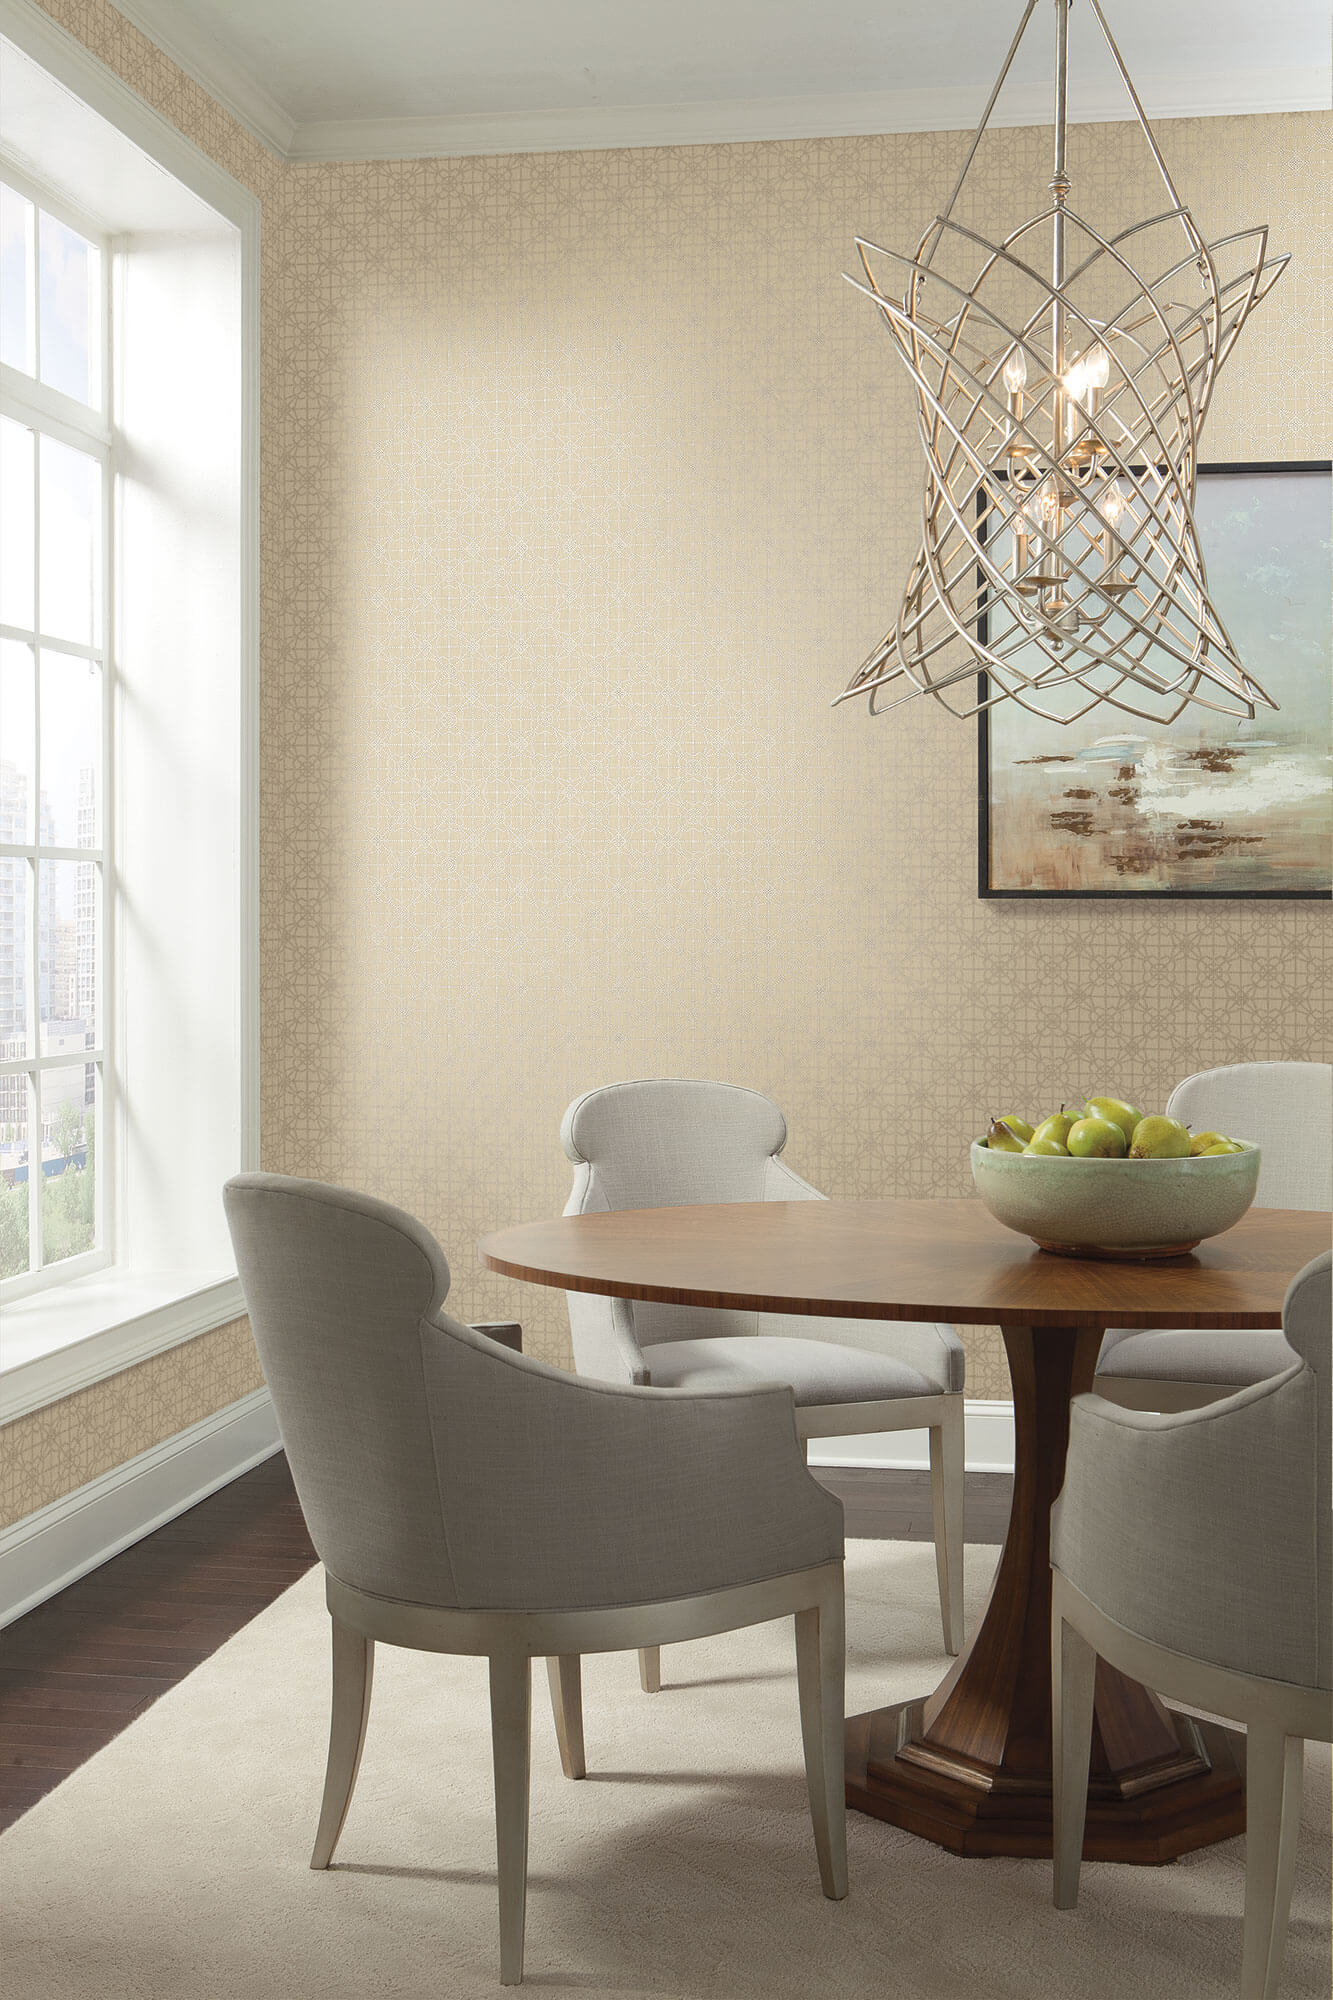 54" Stacy Garcia Gilded Wallpaper - Taupe